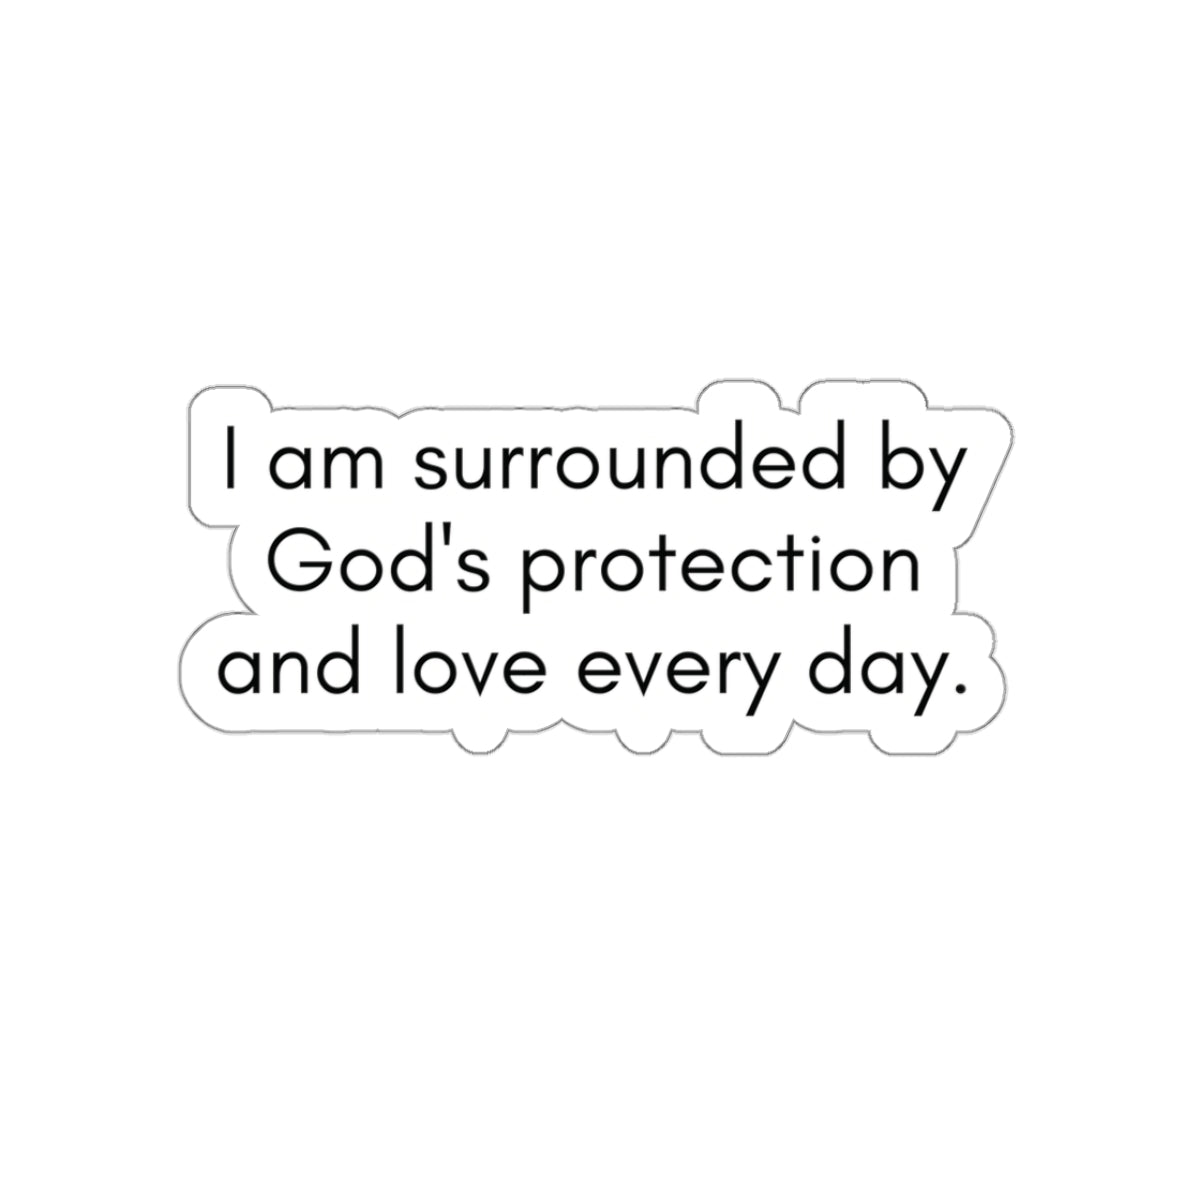 Surrounded By God's Protection Inspirational Quote Kiss-Cut Stickers-Paper products-3" × 3"-White-mysticalcherry